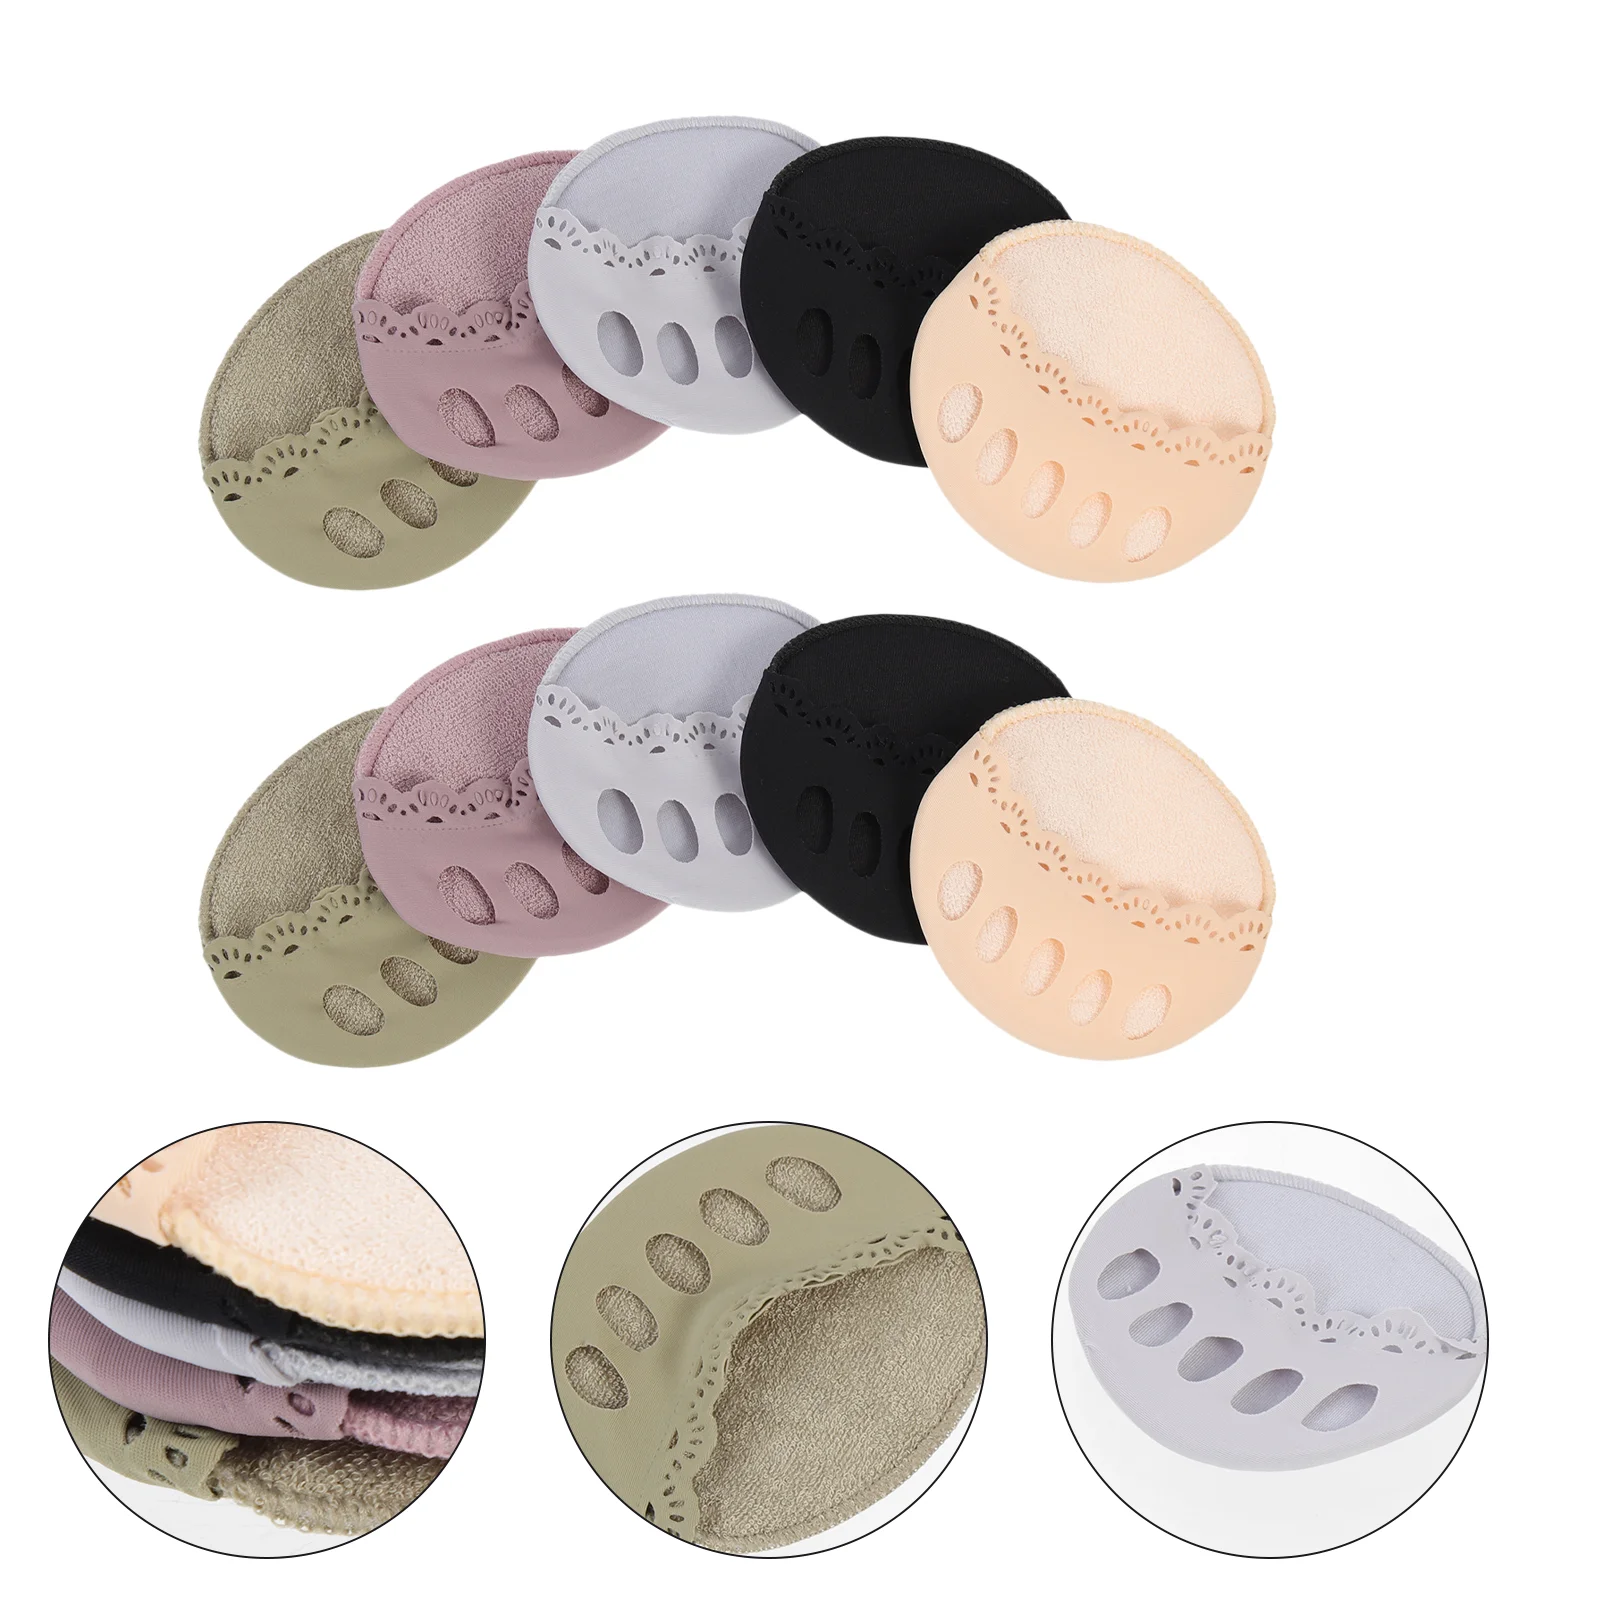 

5 Pairs Forefoot Pad Outdoor Supply Summer Pads Accessories Sock Daily Use Toe Socks Portable Metatarsal Nylon Miss Protection